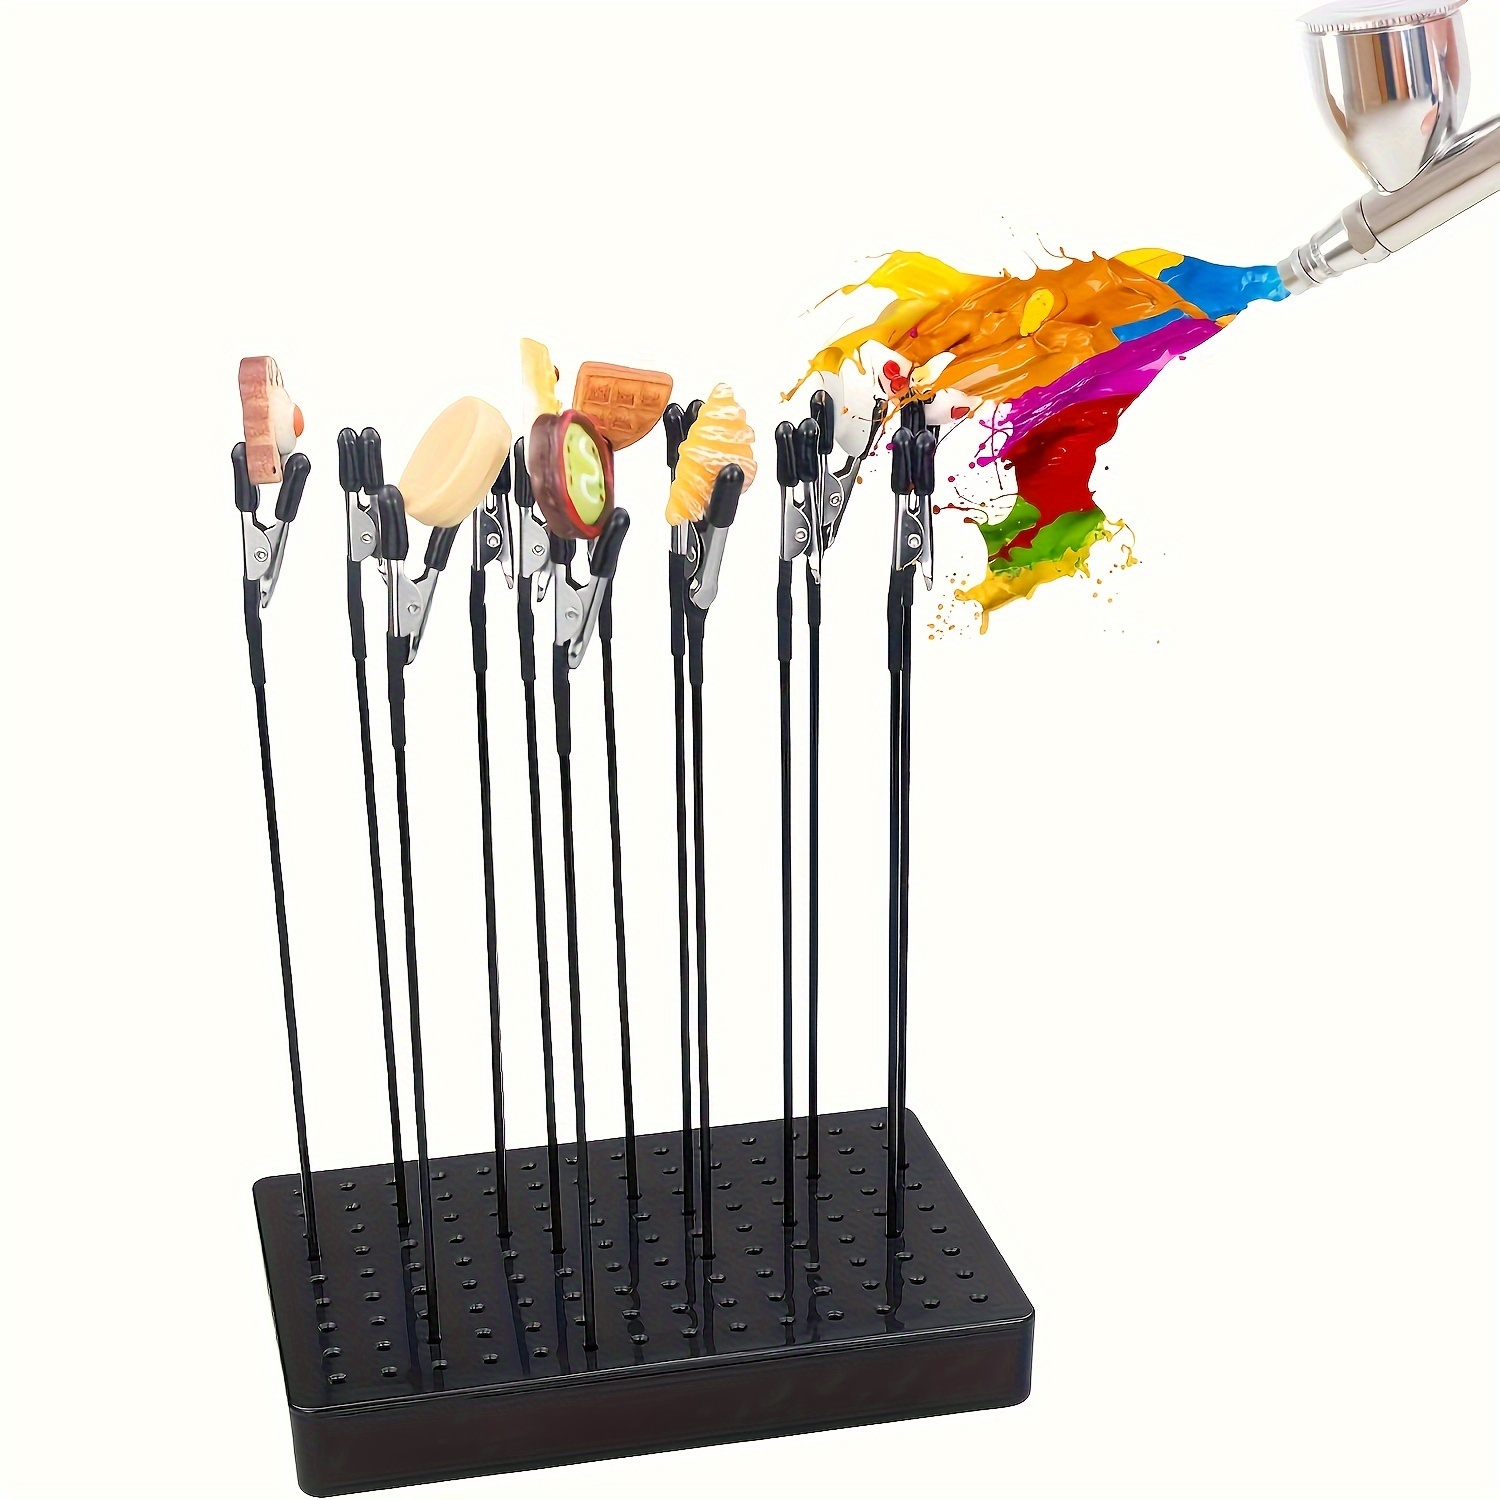 

12-piece Crocodile Clip Rod Set For Modeling Tools For Airbrush Hobby Model Parts, 1 Set Of Black Painting Stand Set Modeling Tools Model Painting Stand Base And